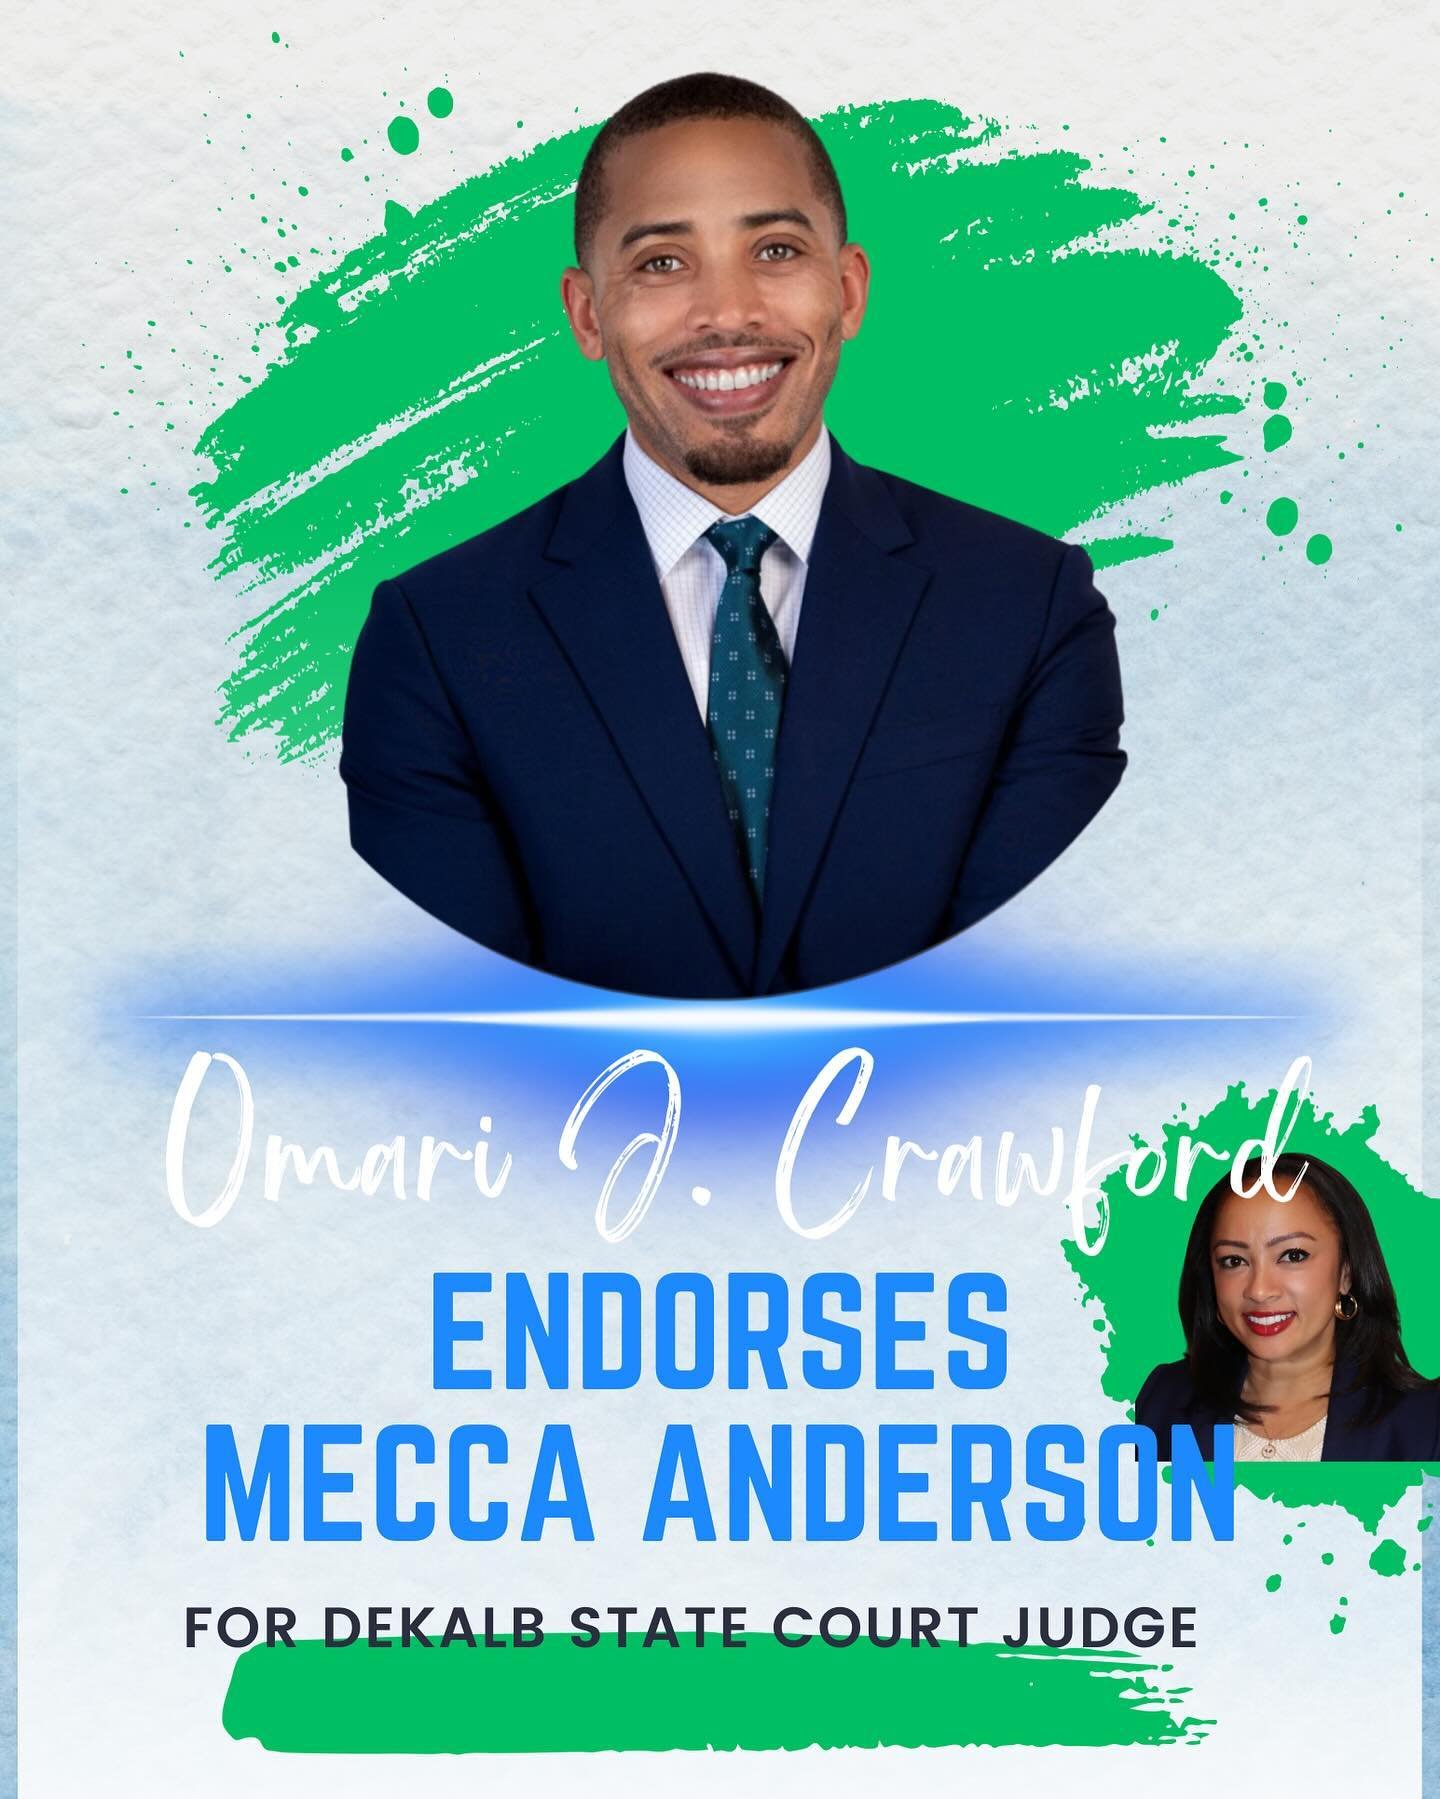 Excited to have the endorsement of my former colleague and lifelong friend Omari J. Crawford, Representative for Georgia&rsquo;s 84th district. Omari is known for his dedication to serving constituents and advocating for their needs. With a backgroun